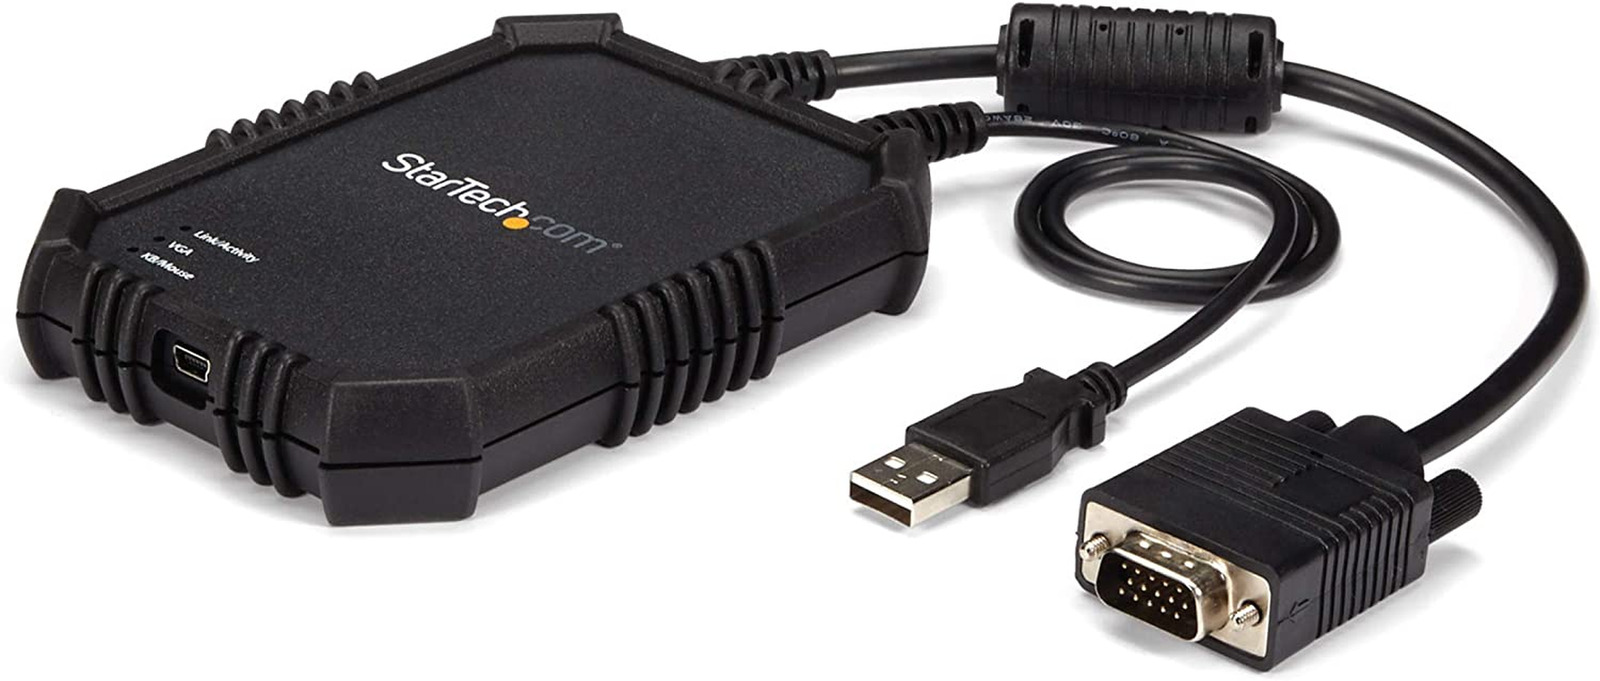 USB Crash Cart Adapter with File Transfer and Video Capture - Laptop to Server K